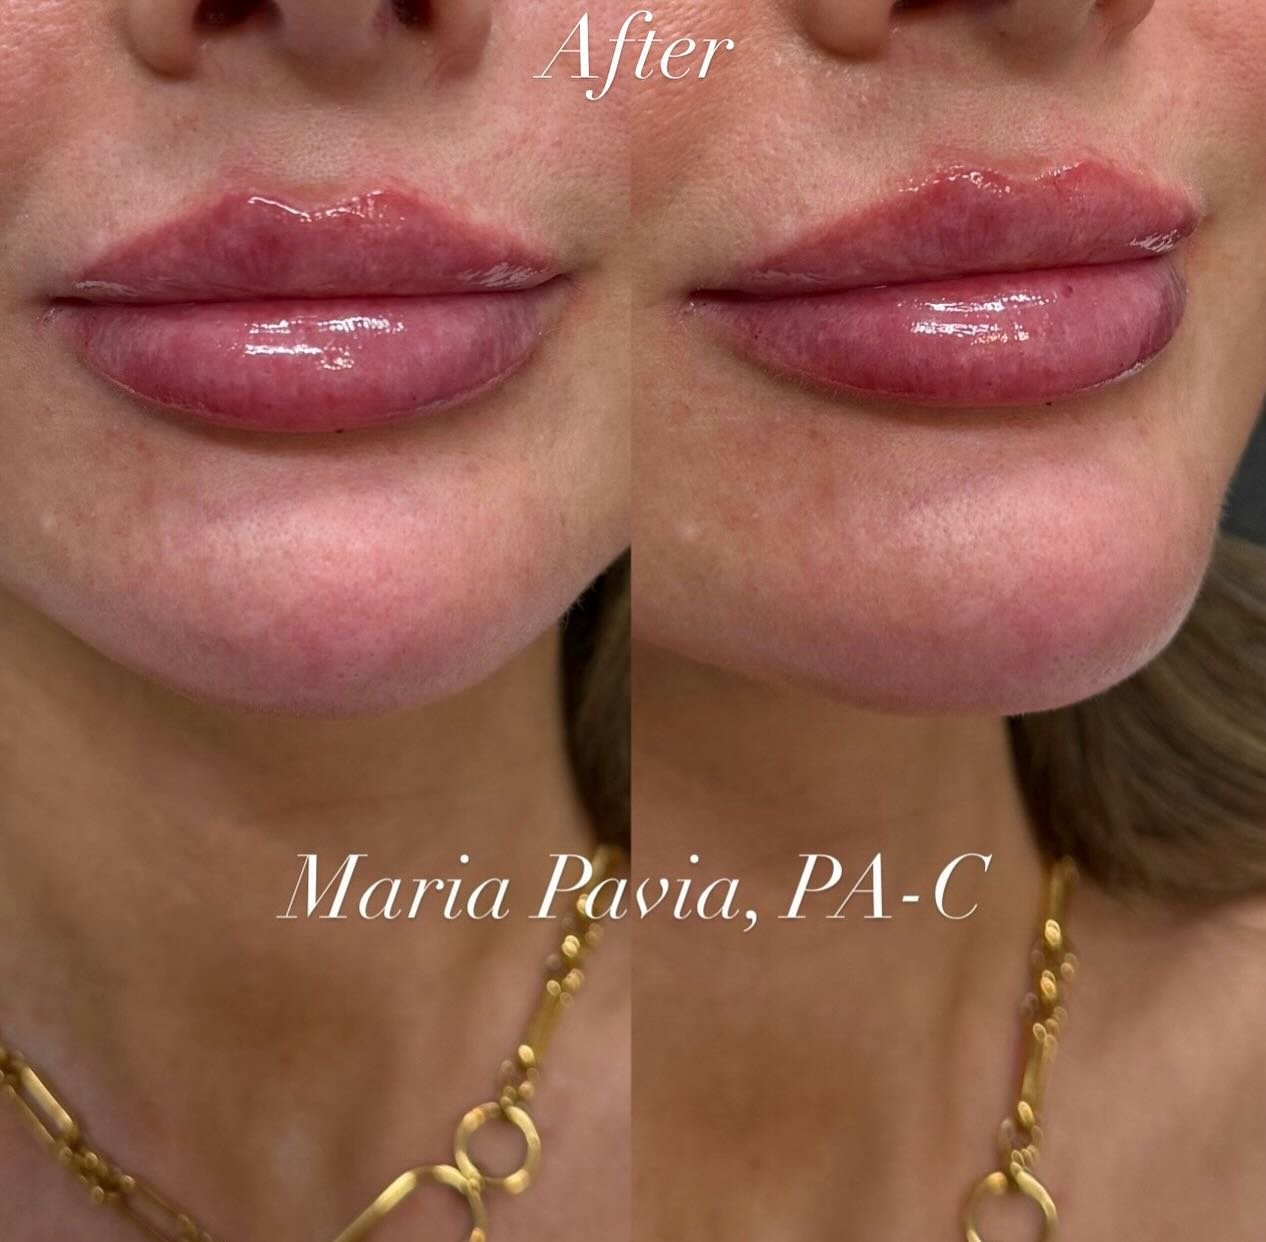 Her results are ✨STUNNING✨

This serves as a perfect illustration of how through precise injections and a specialized technique, fillers can address lip asymmetry👄💉 We enhanced her lips to create fullness, definition, and hydration. We just LOVE he